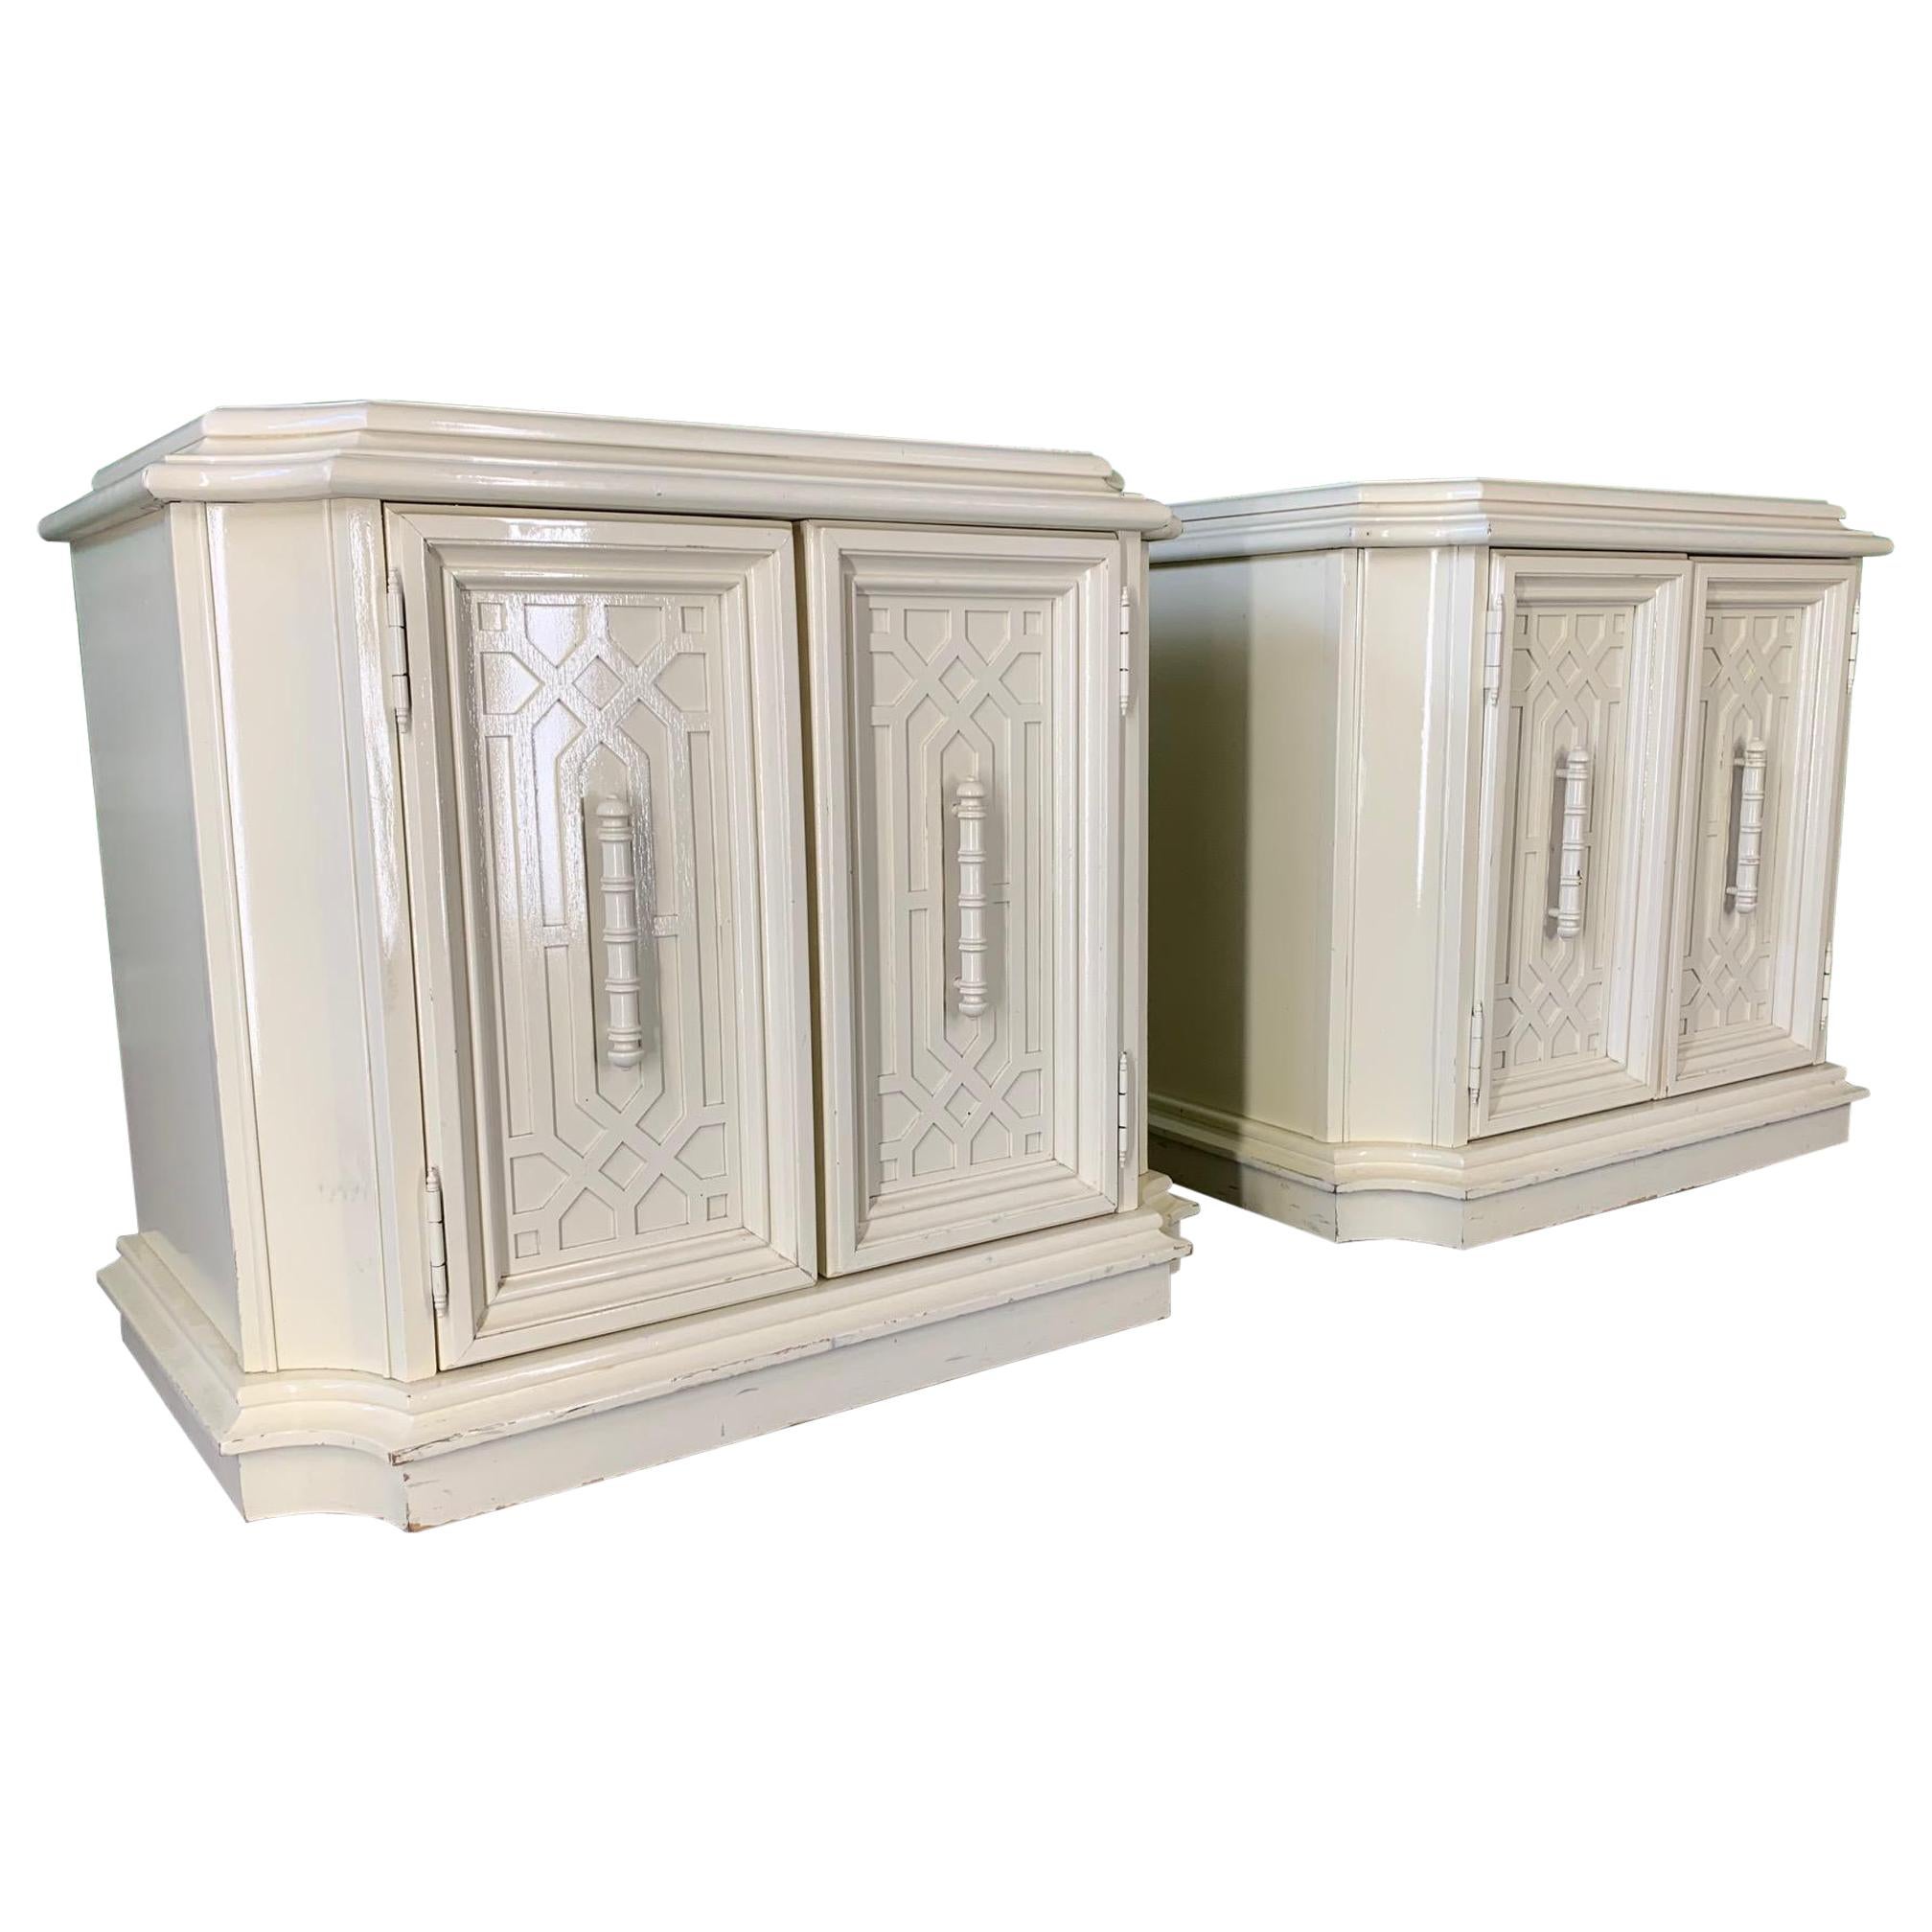 Heavy Nightstands in Chinoiserie Style, a Pair